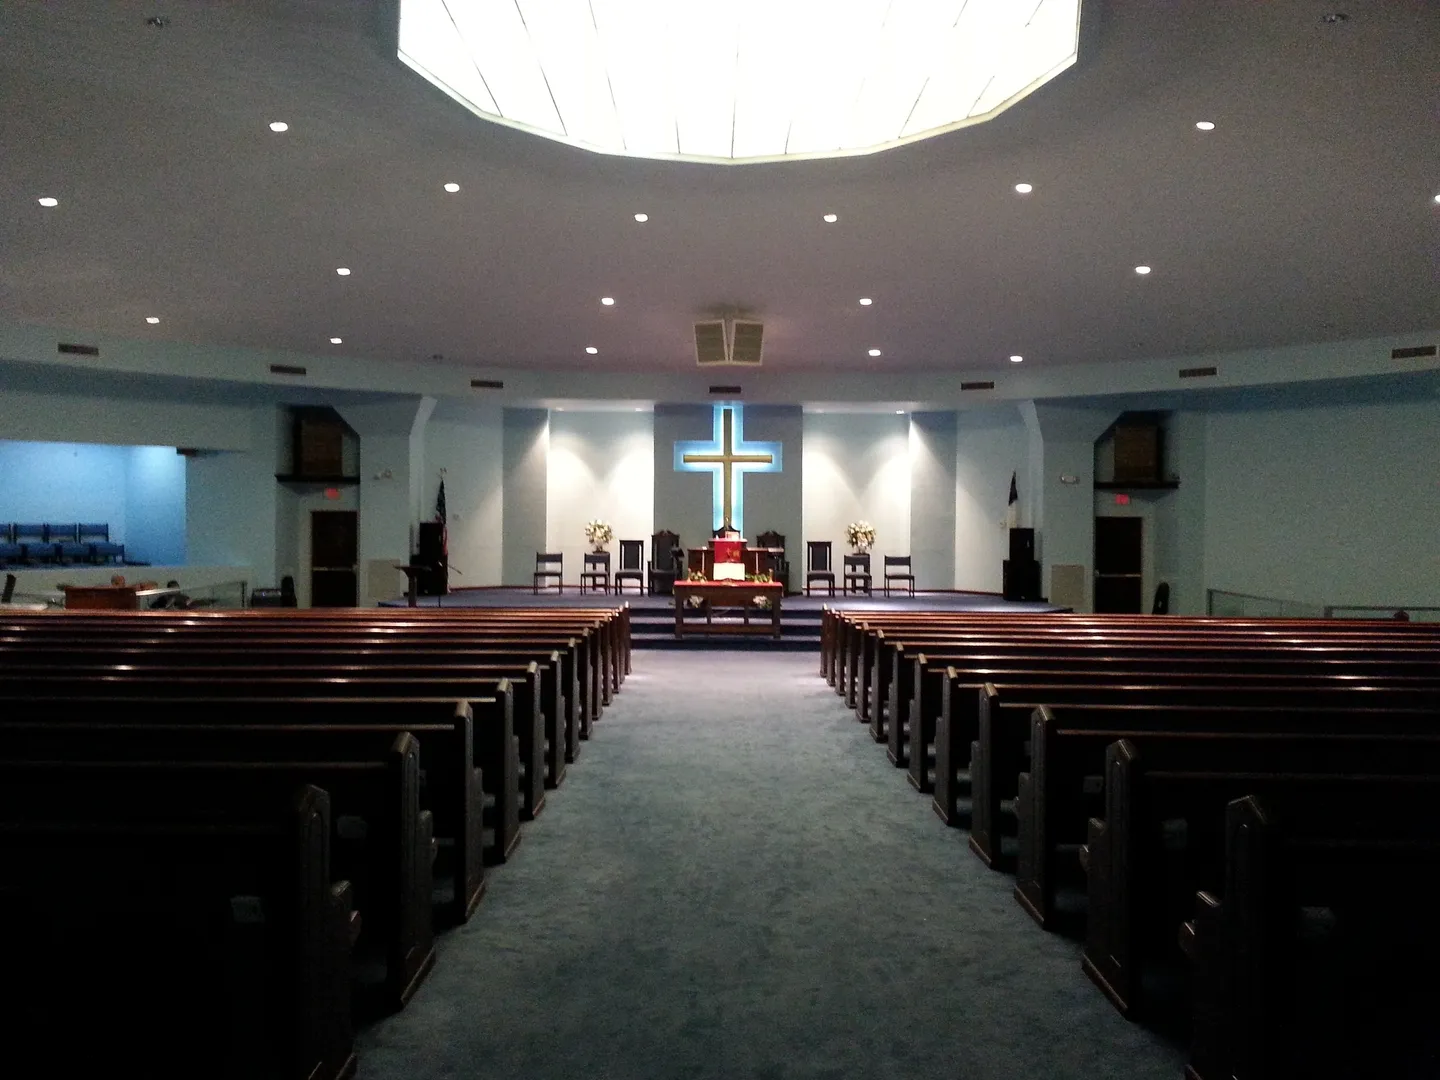 A church with pews and a cross in the center.